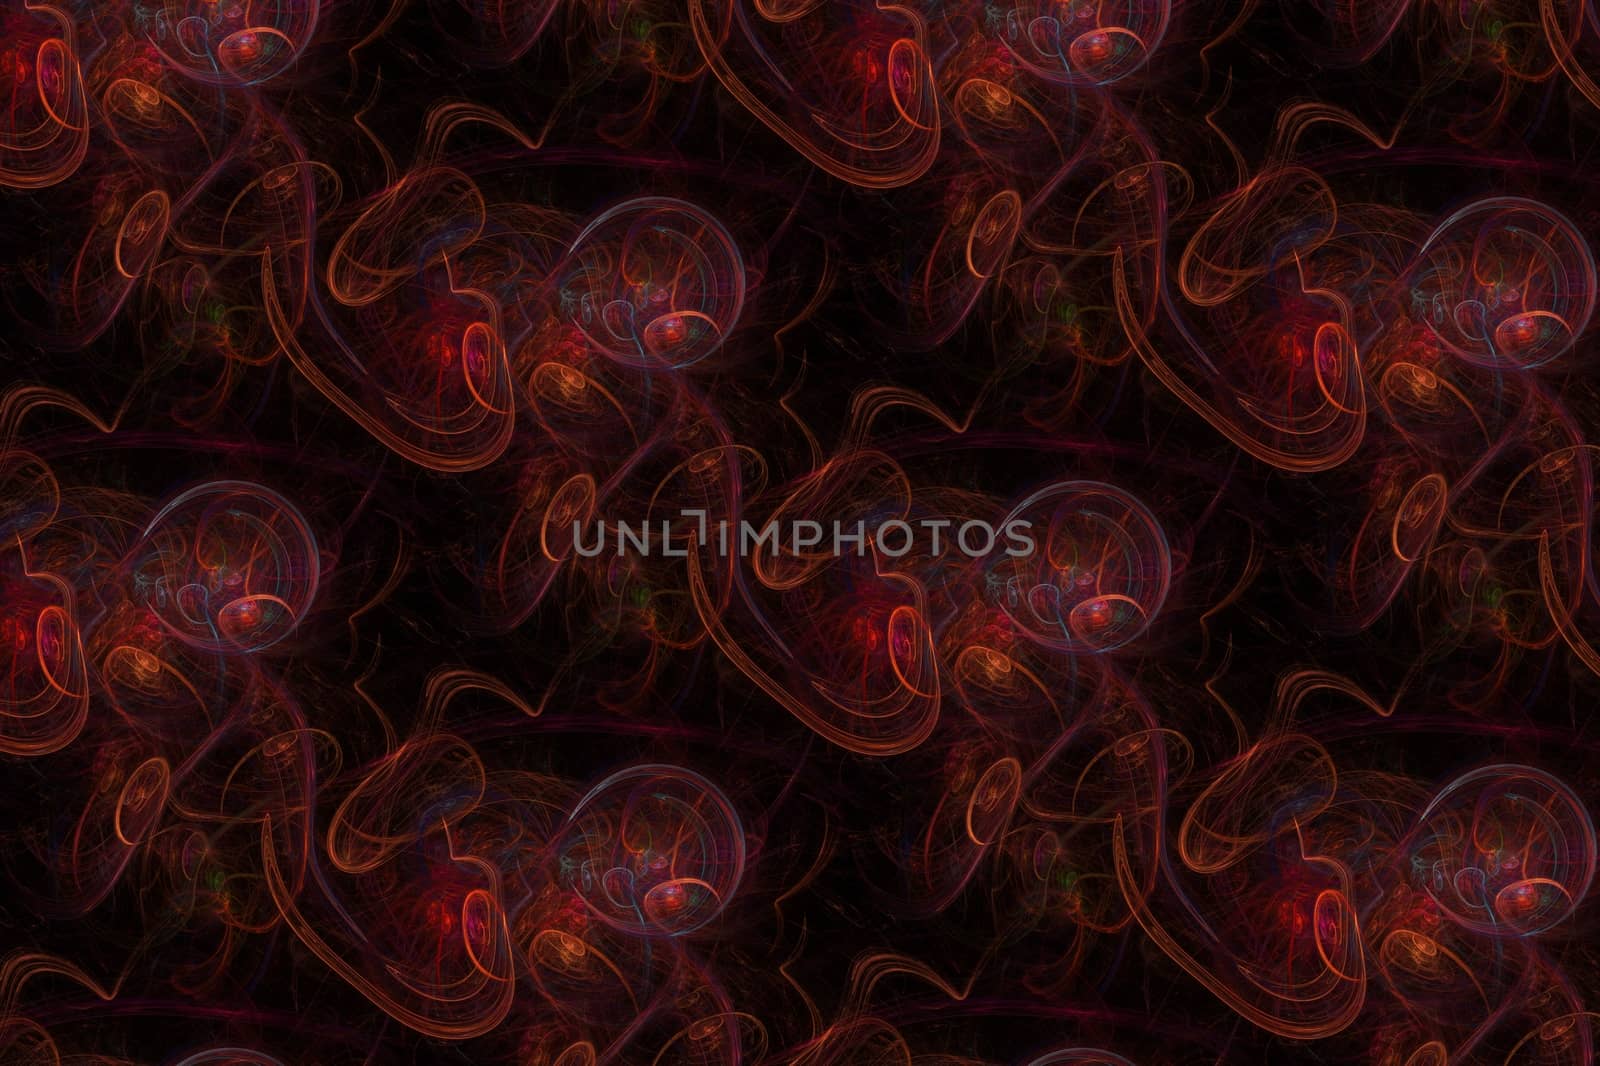 Abstract background with red swirls and waives pattern.